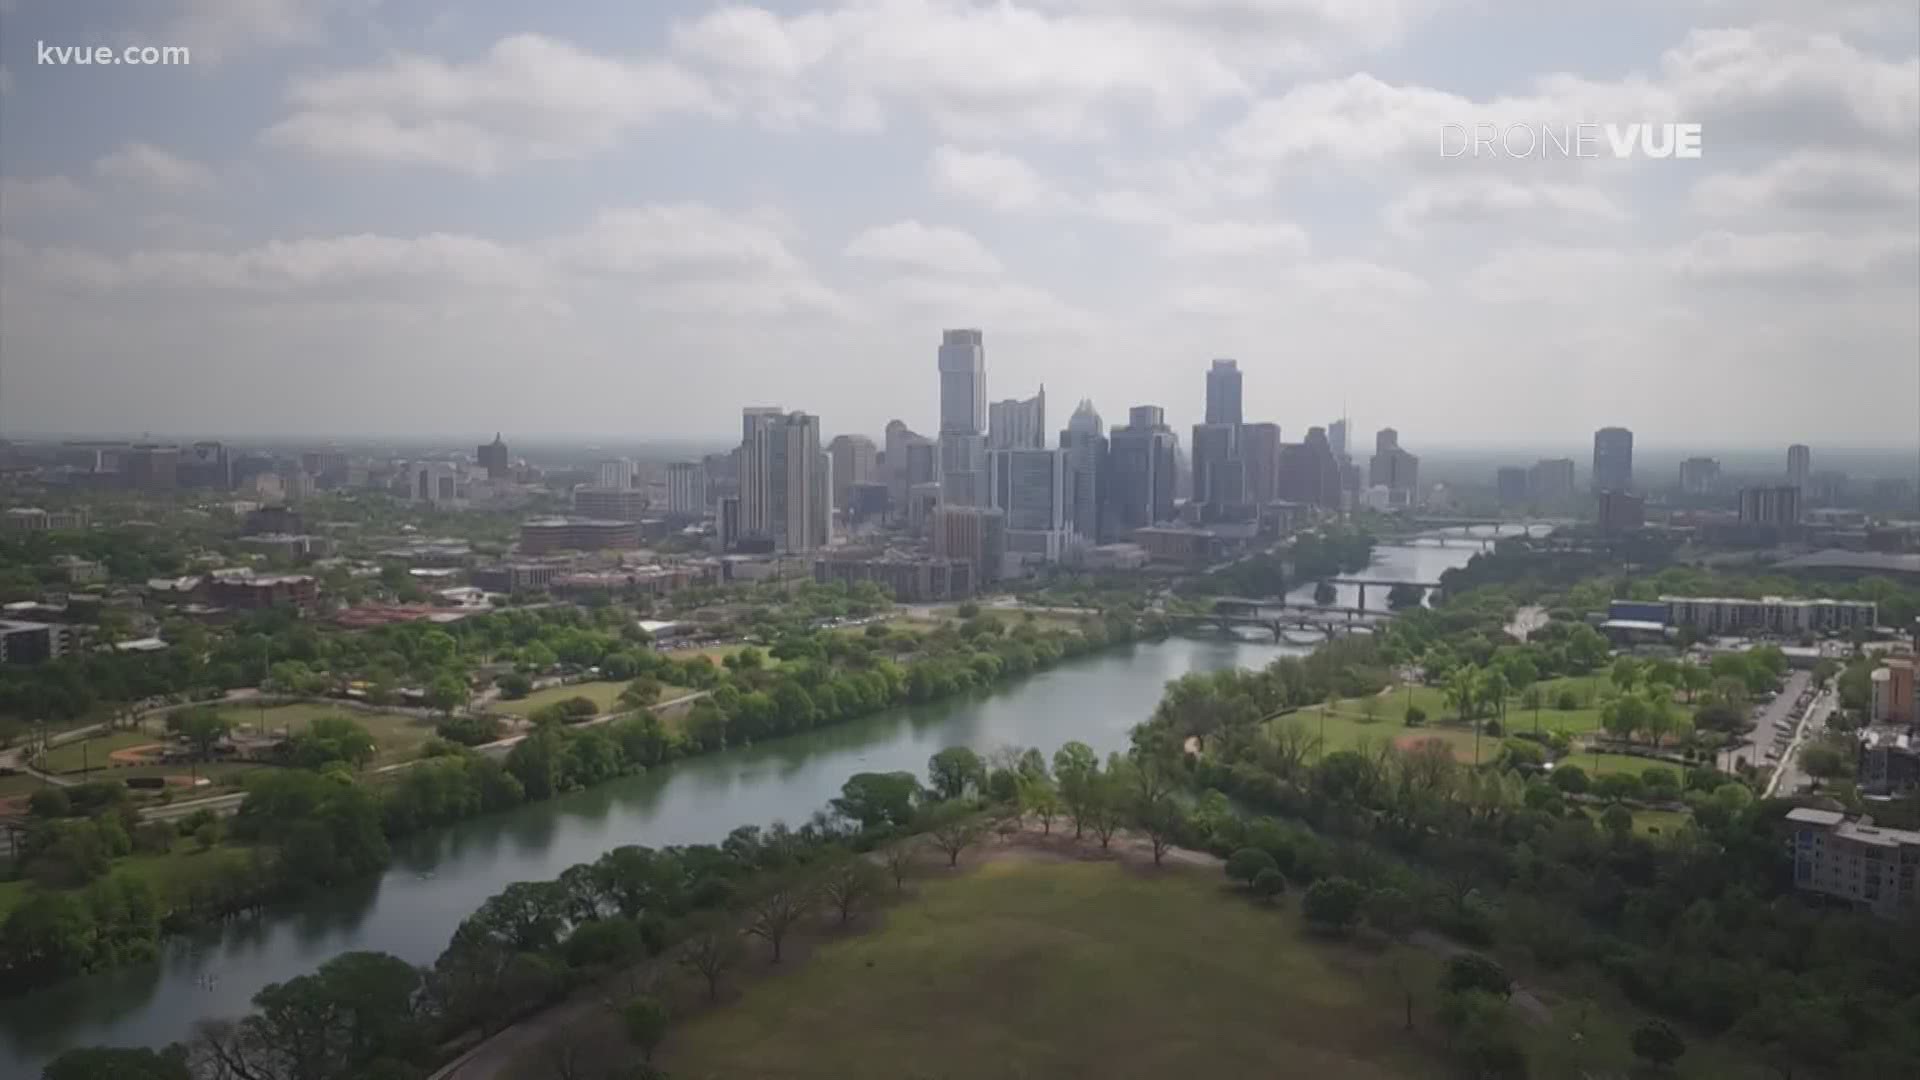 A Zillow study says Austin is expected to be the nation's hottest housing market this year. The median home price within the Austin city limits is now $433,000.